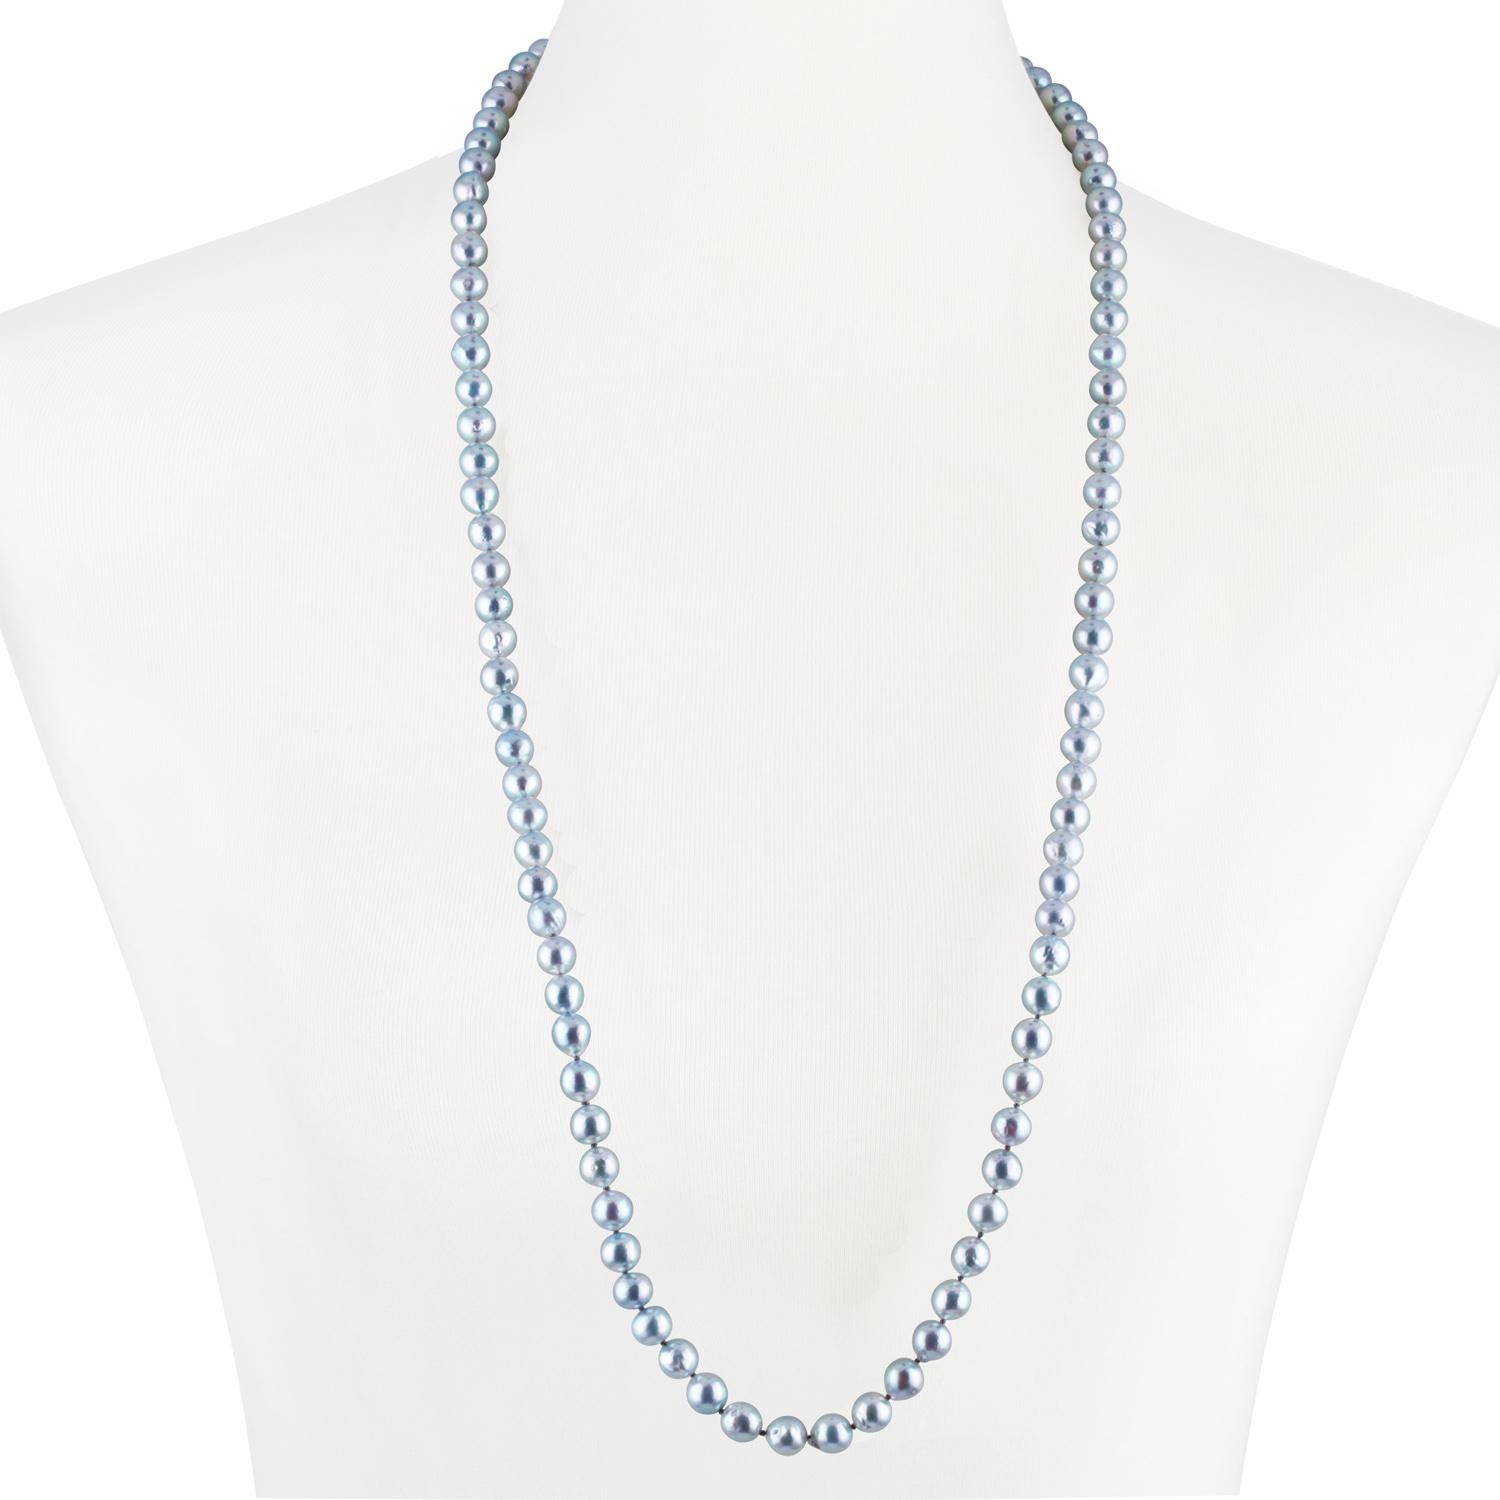 These Japanese Akoya natural blue color baroque cultured pearls measure 8-9mm. 
This double length necklace is strung with a 14k white gold 8mm ball clasp to 36